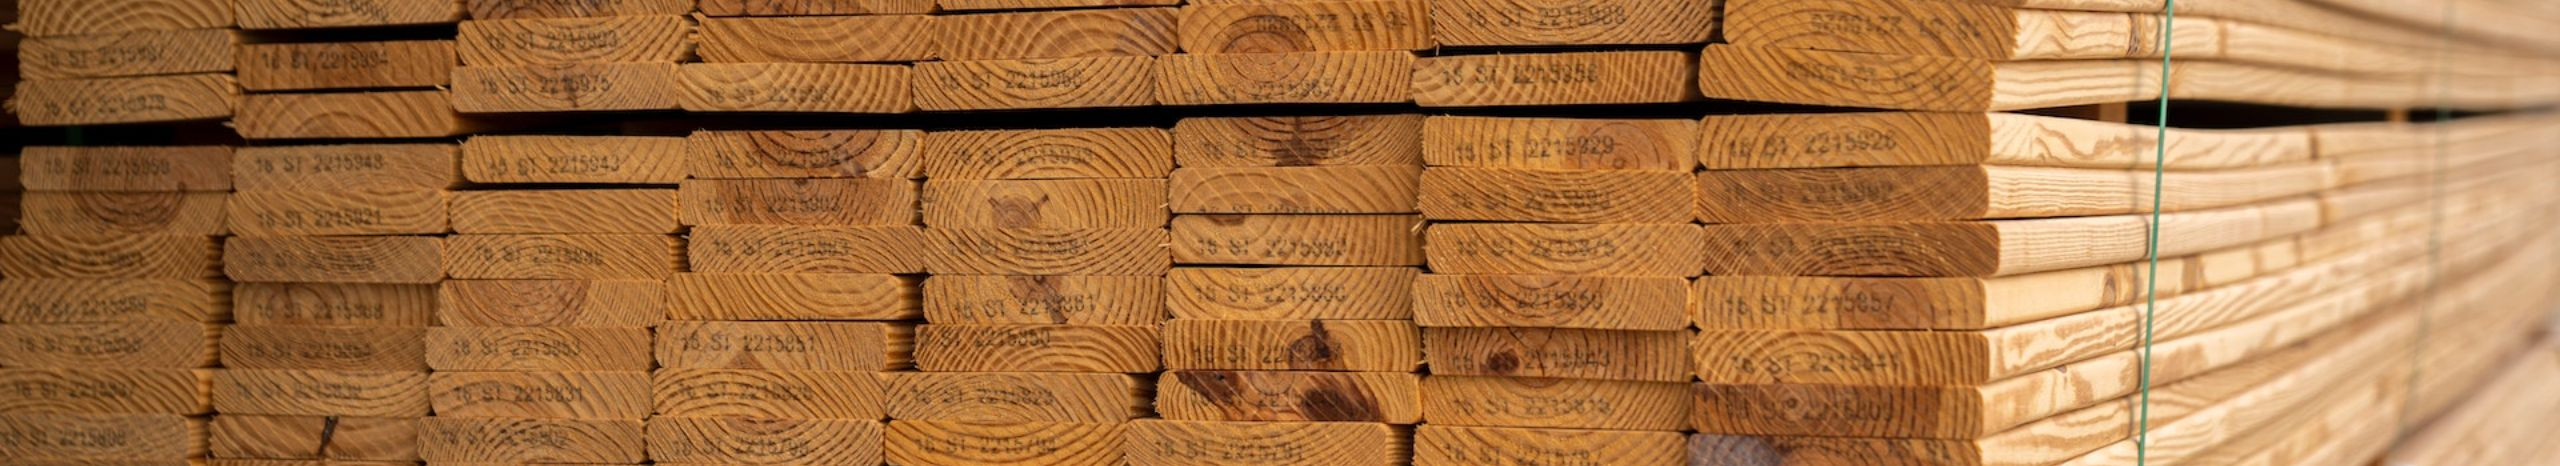 heating materials, Square wood briquettes, Special solutions for woodworking, Wood finish, floorboards, Lining boards, terrace boards, Wood material, impregnated wood, finishing materials